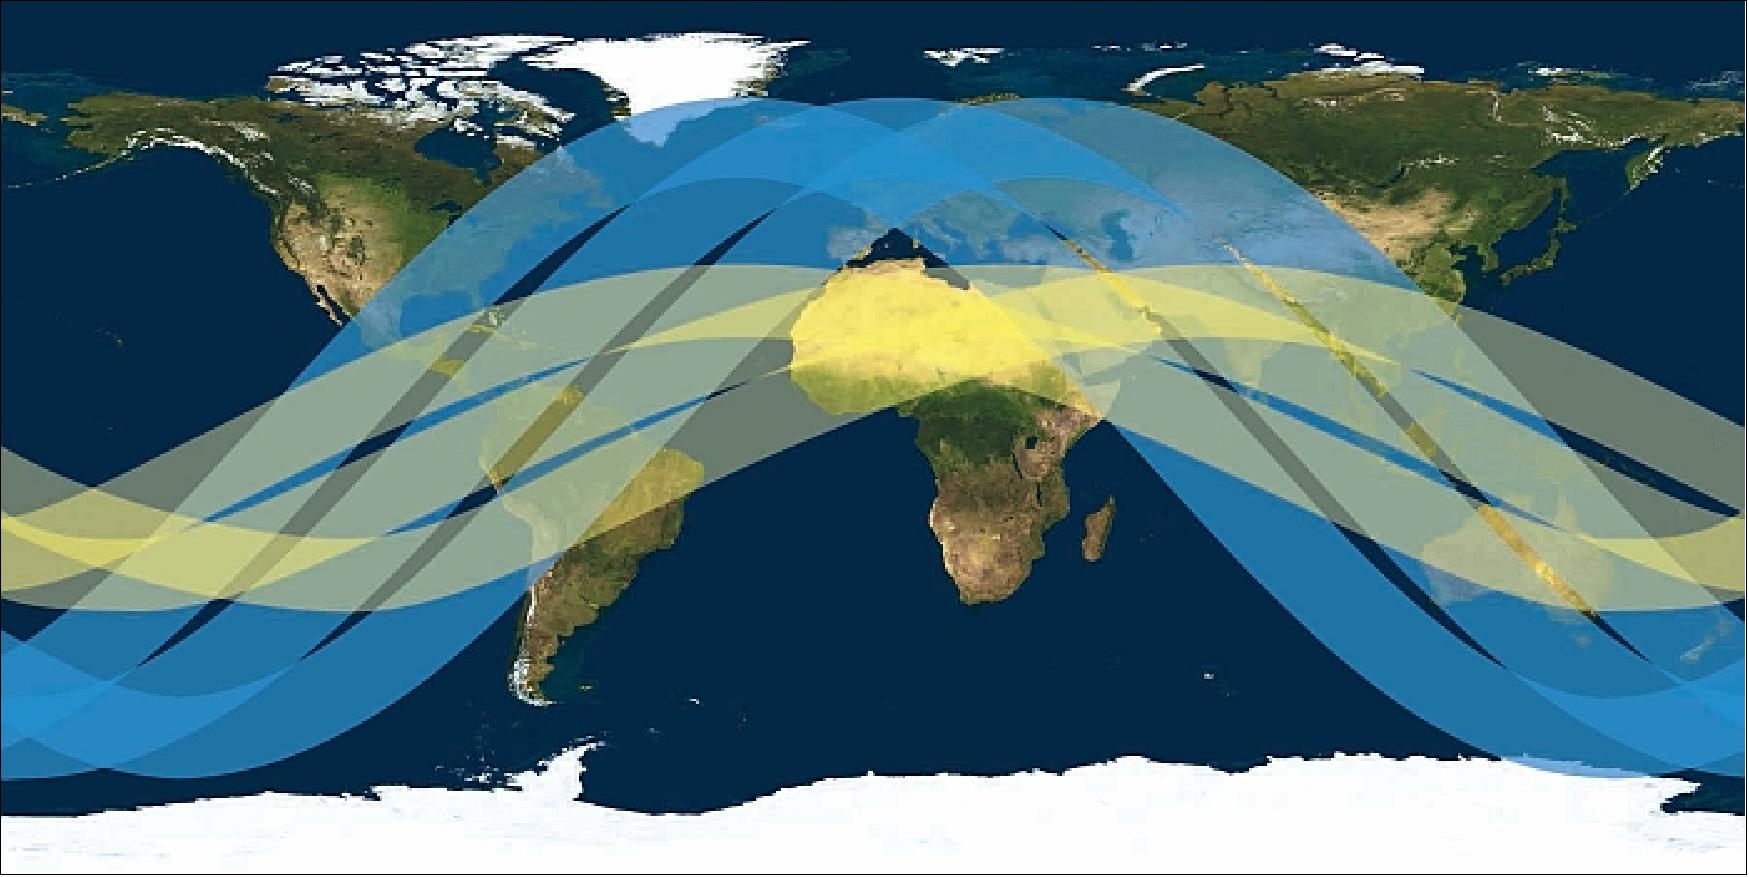 Figure 13: The graphic compares the area covered by three TRMM orbits (yellow) versus three orbits of the GPM Core Observatory (blue), image credit: NASA) 54)